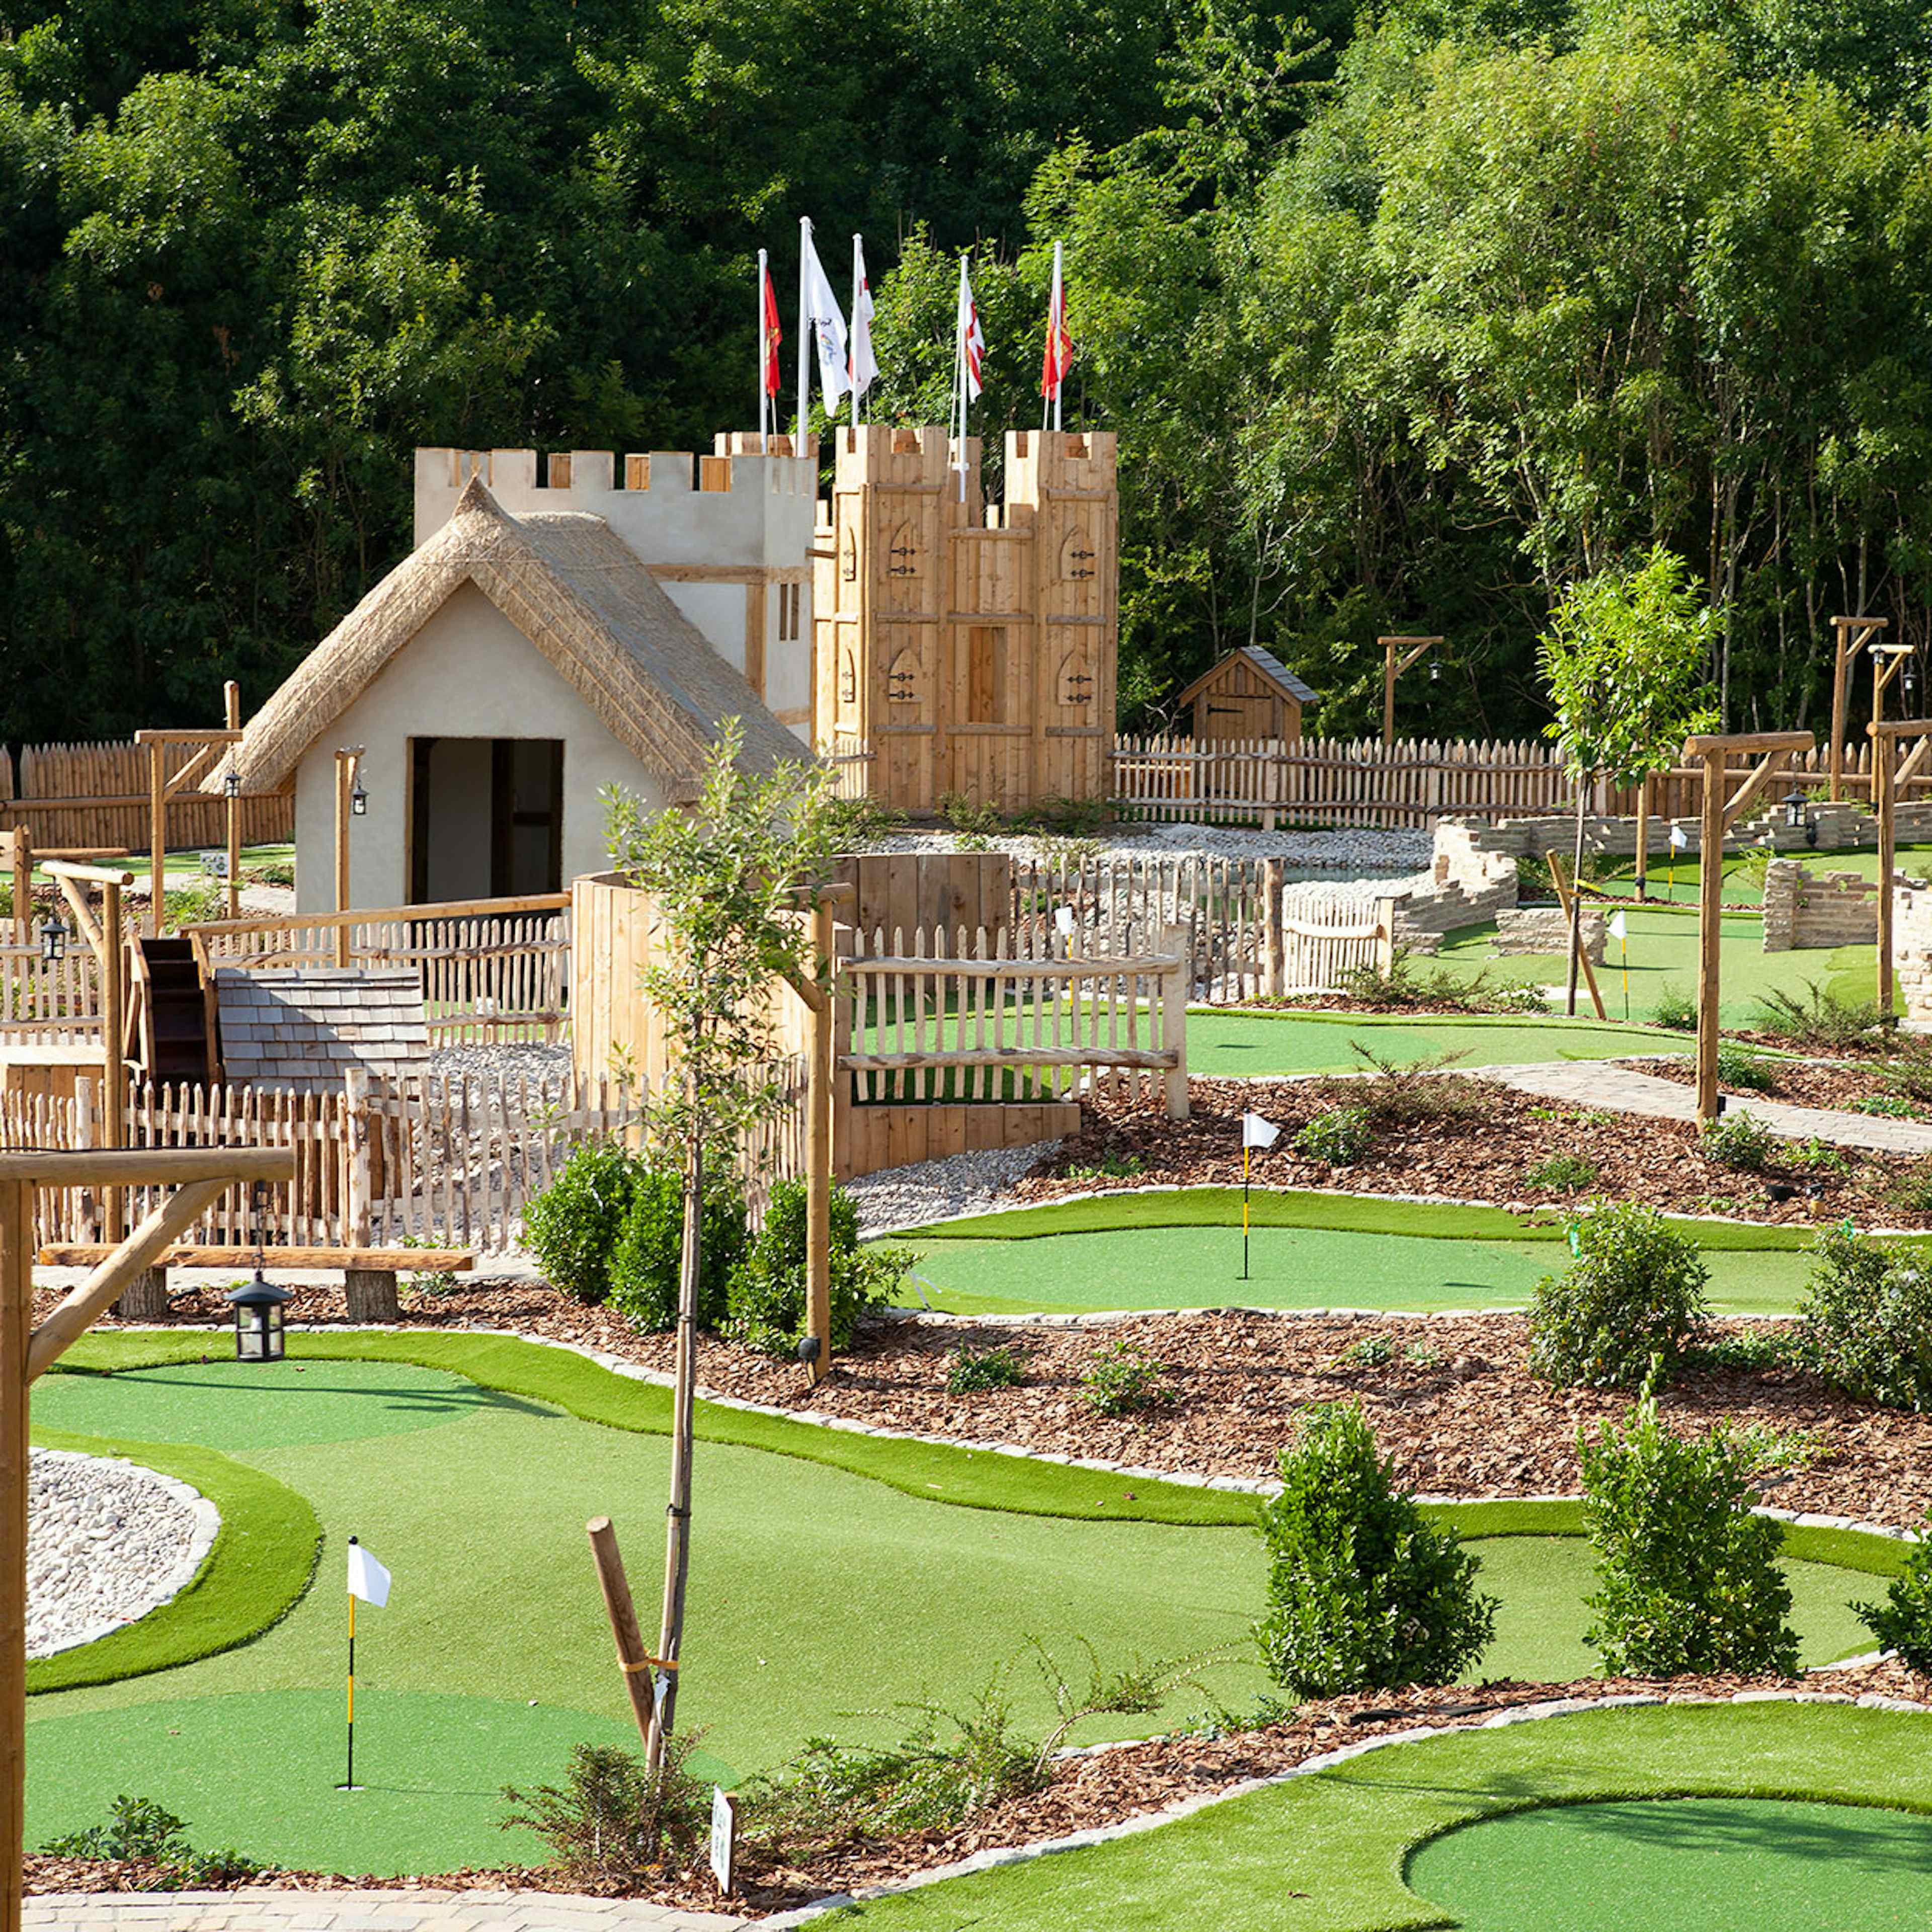 Golf World Stansted - Adventure Golf Course image 2